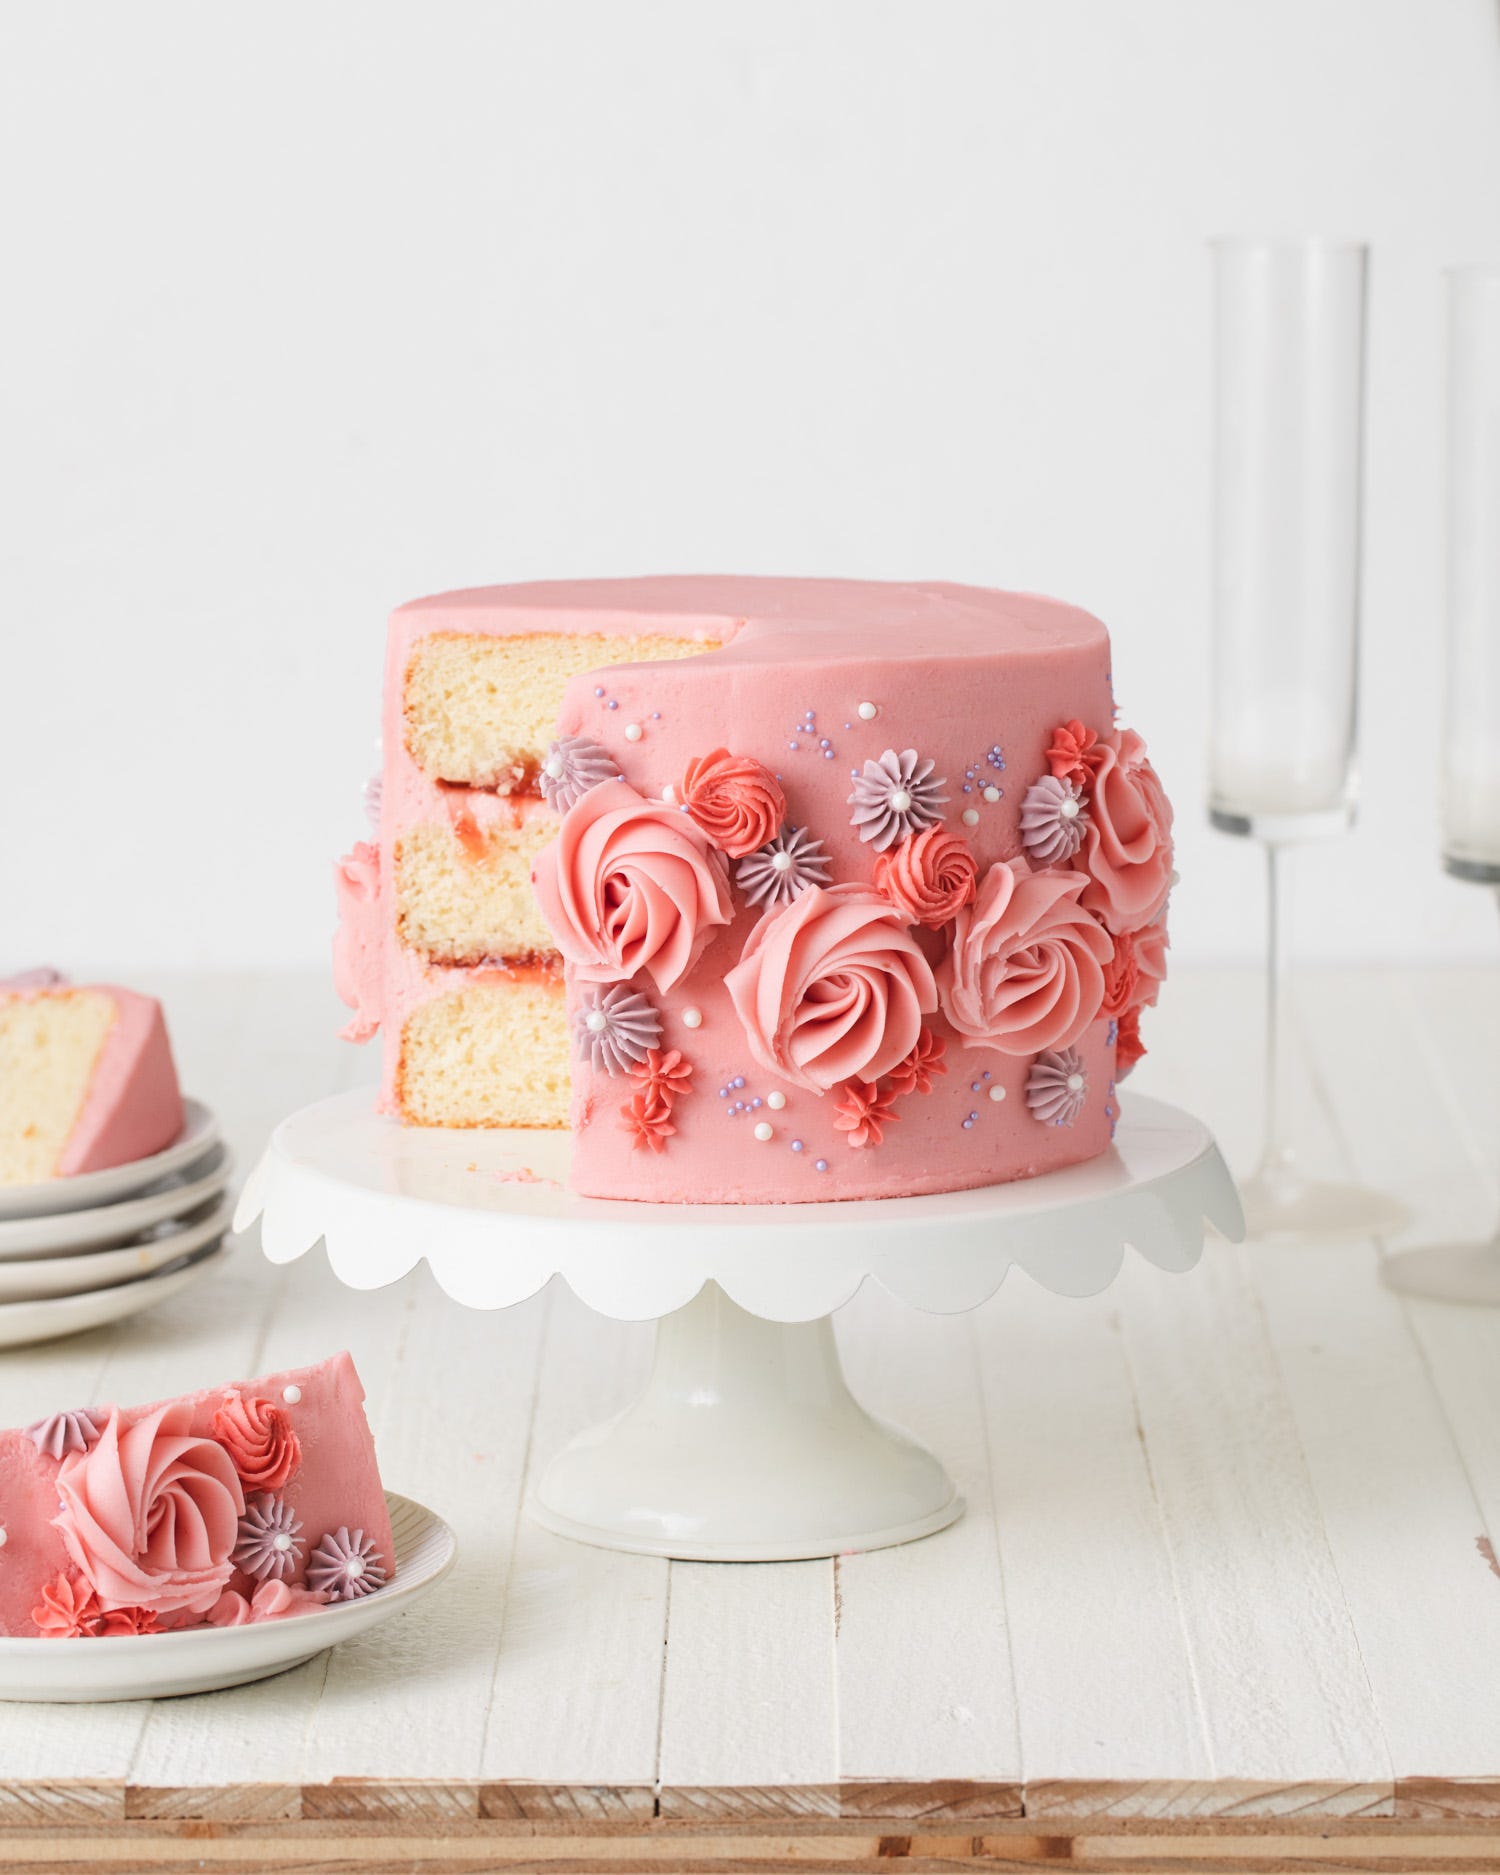 33 Shades of Green: Weekend Kitchen: Pink Prosecco Cake